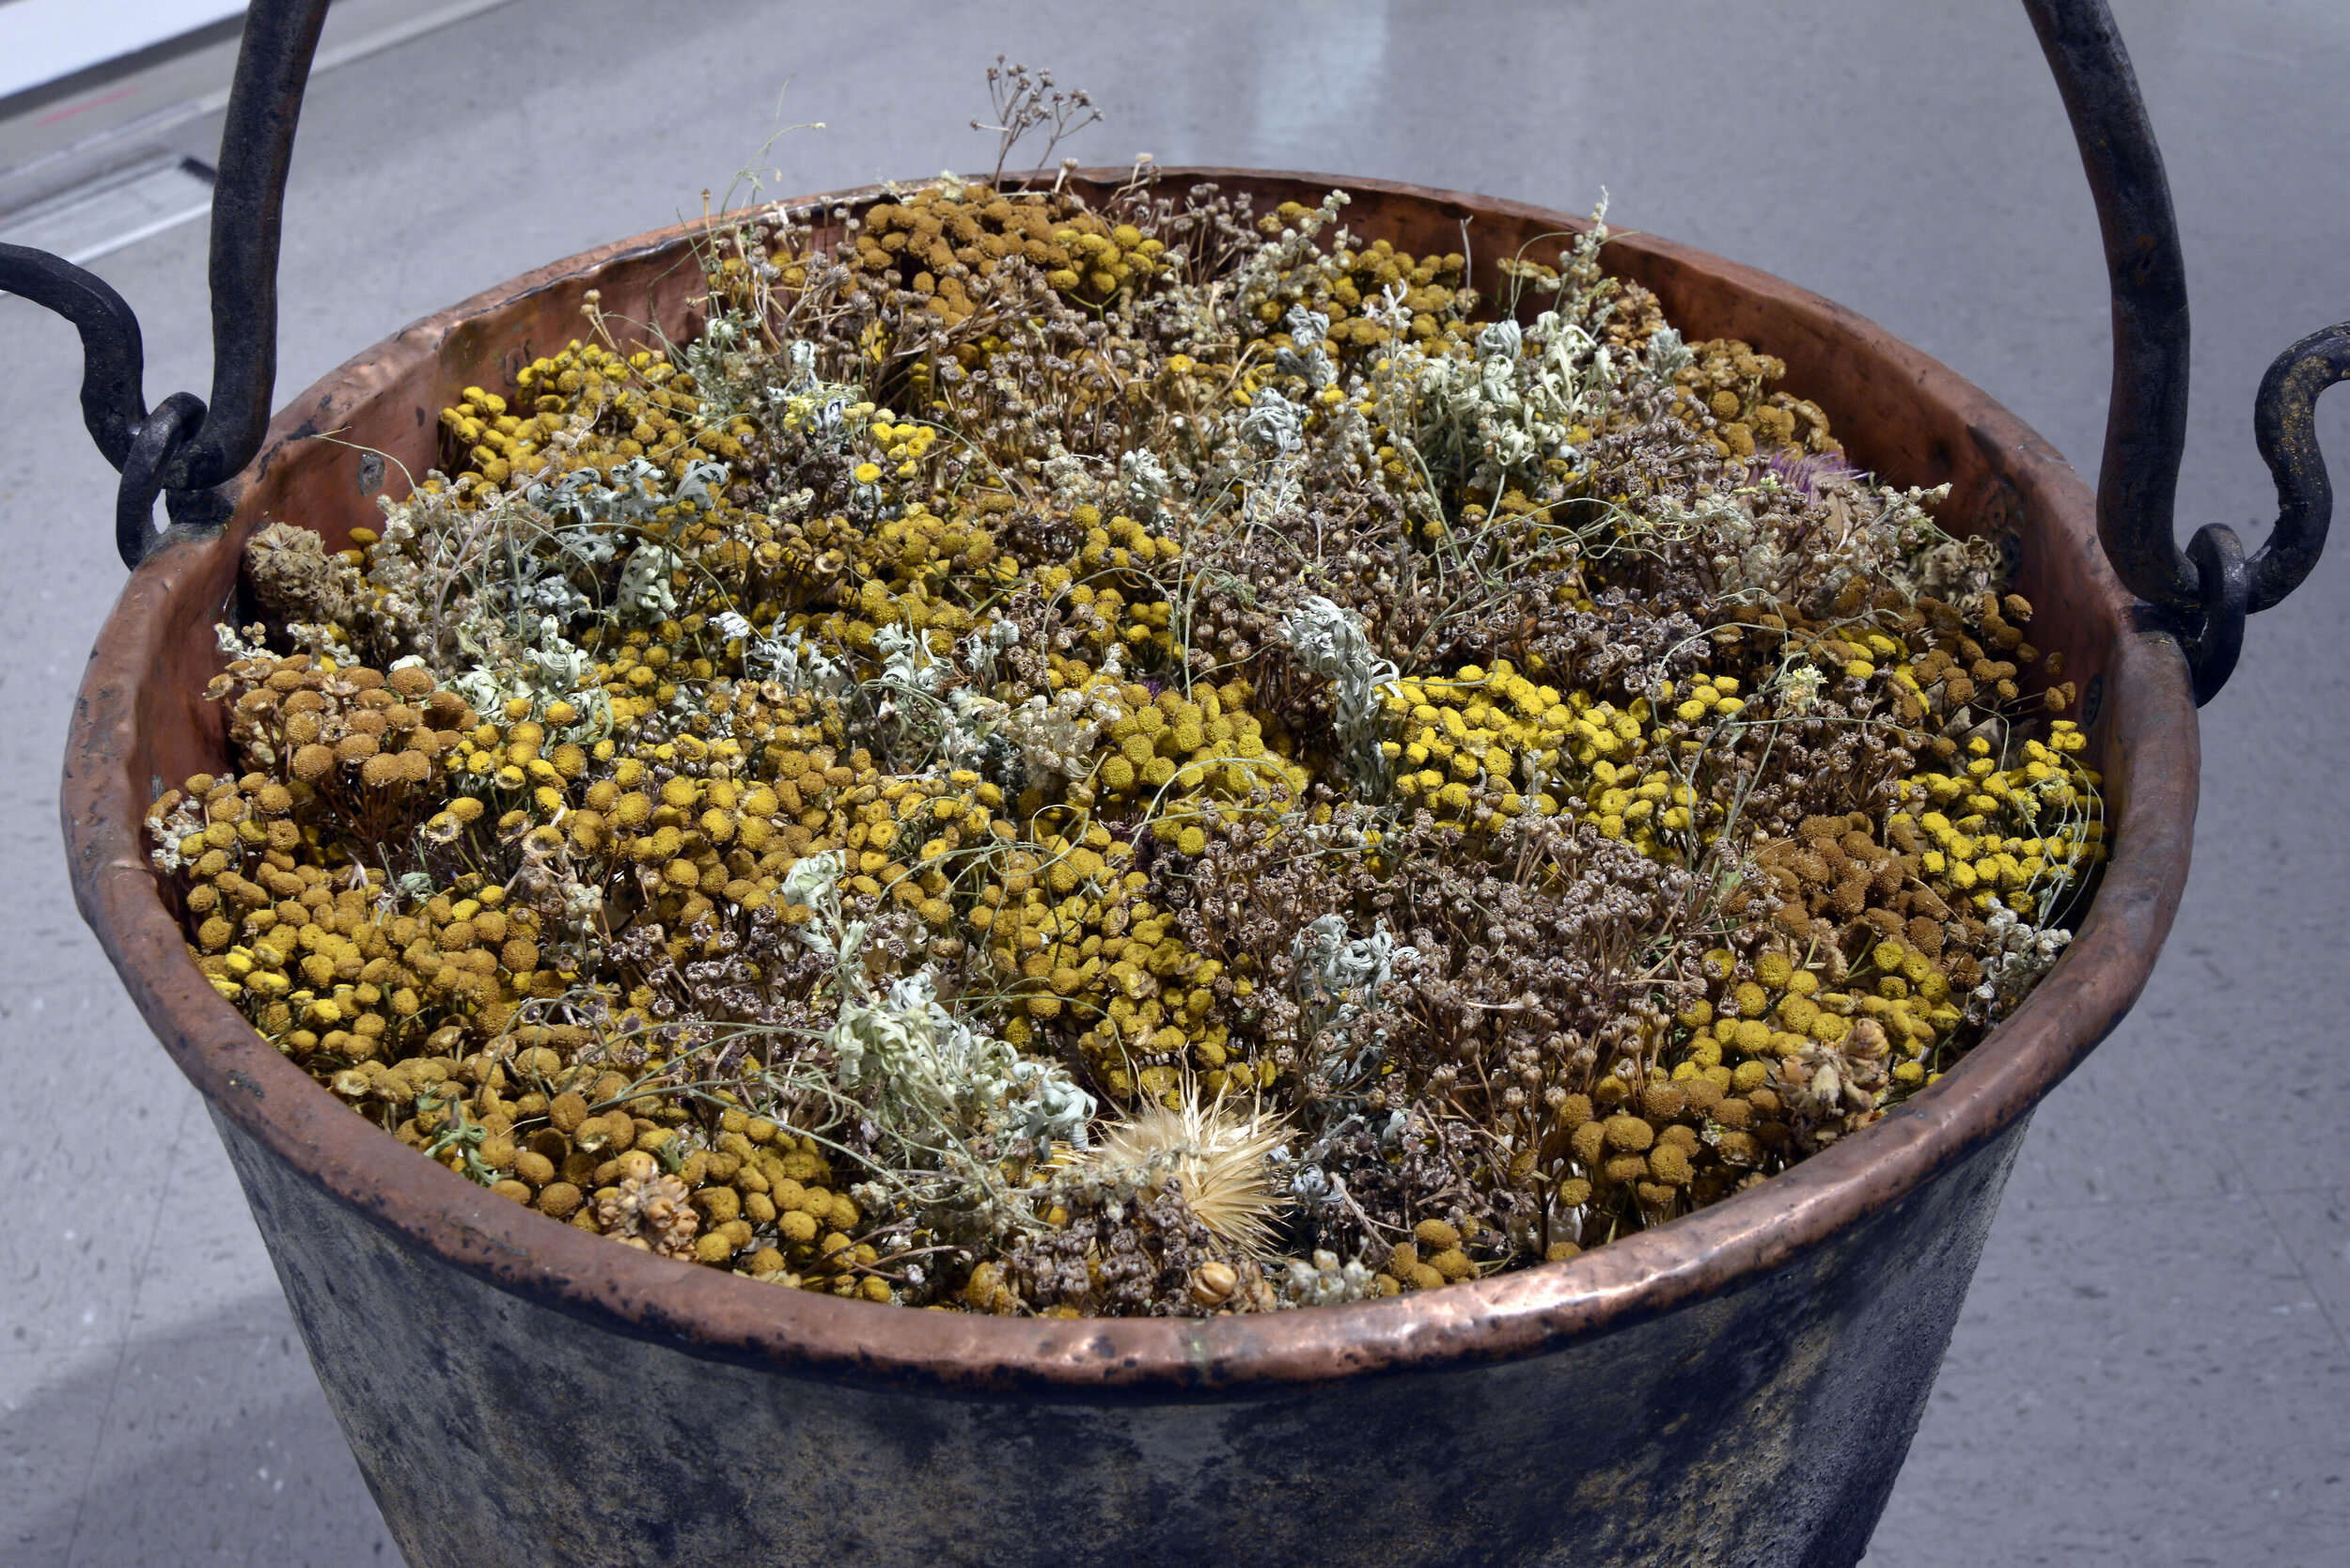  Alana Bartol,  Rotten Pot (detail),  2020, used 19th c. copper and forged iron cauldron from France, coal, rocks, dried plants: wormwood, tansy, and sweet clover. 